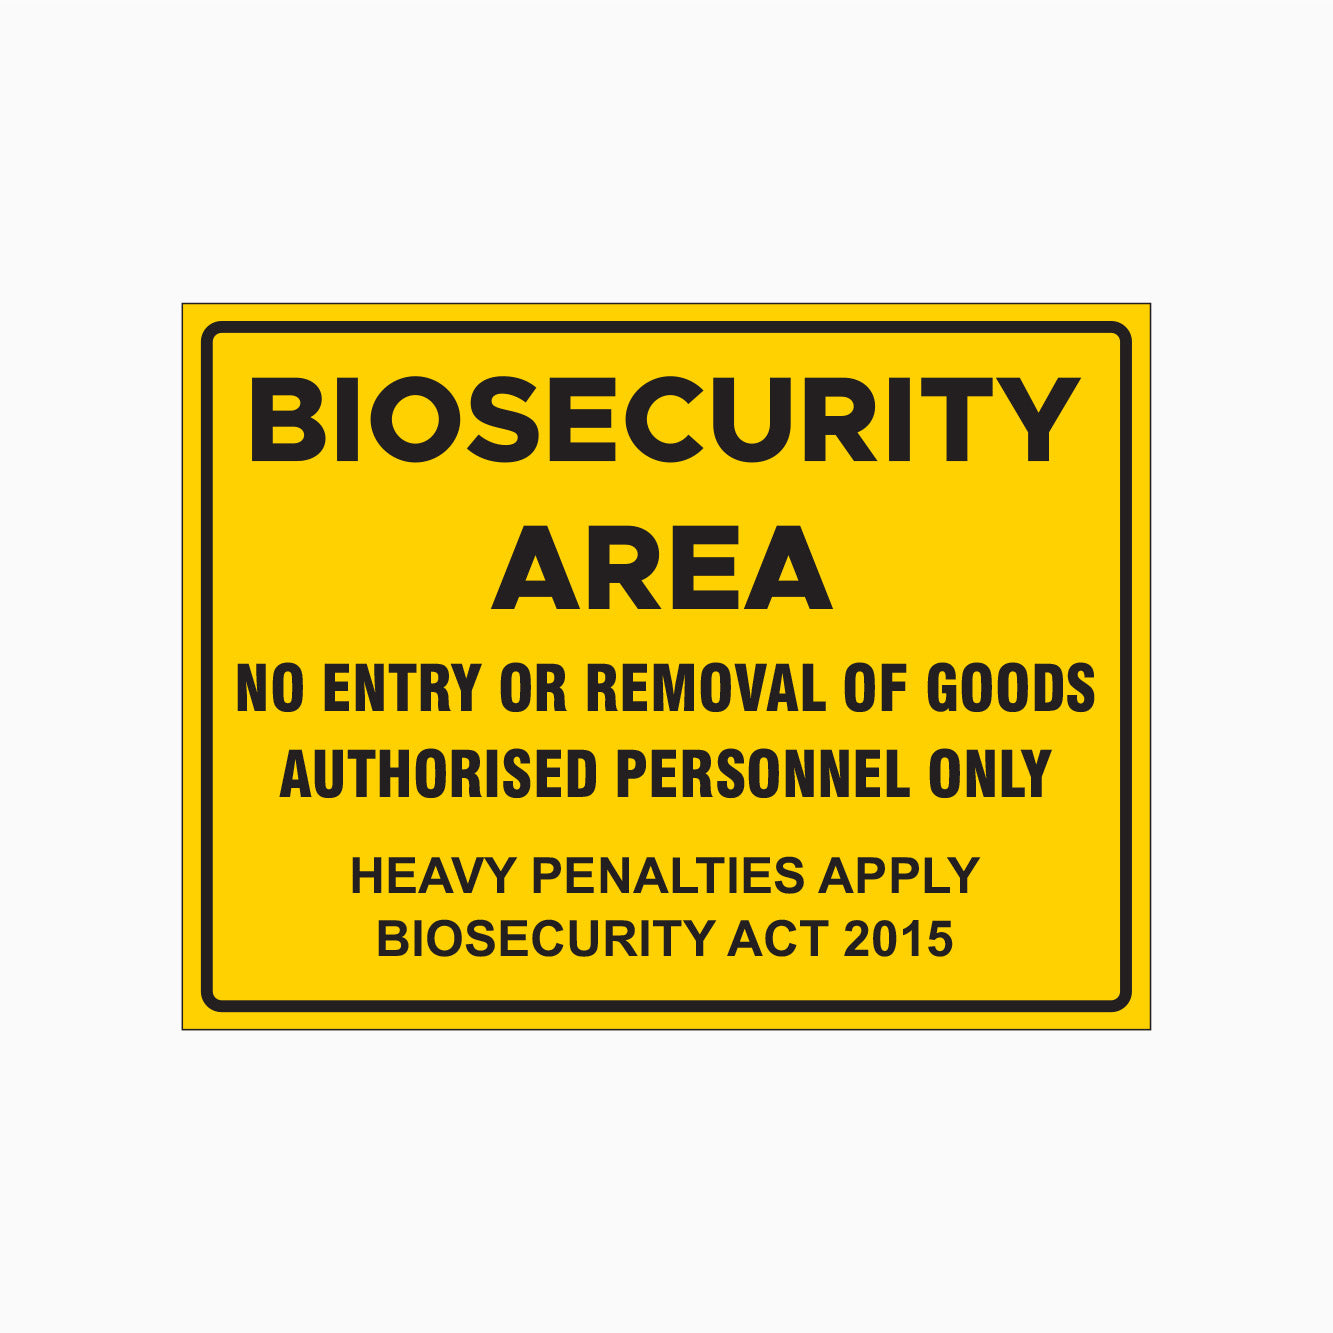 BIOSECURITY AREA SIGN - NO ENTRY OR REMOVAL OF GOODS AUTHORISED PERSONNEL ONLY SIGN - HEAVY PENALTIES APPLY BIOSECURITY ACT 2015 SIGN 